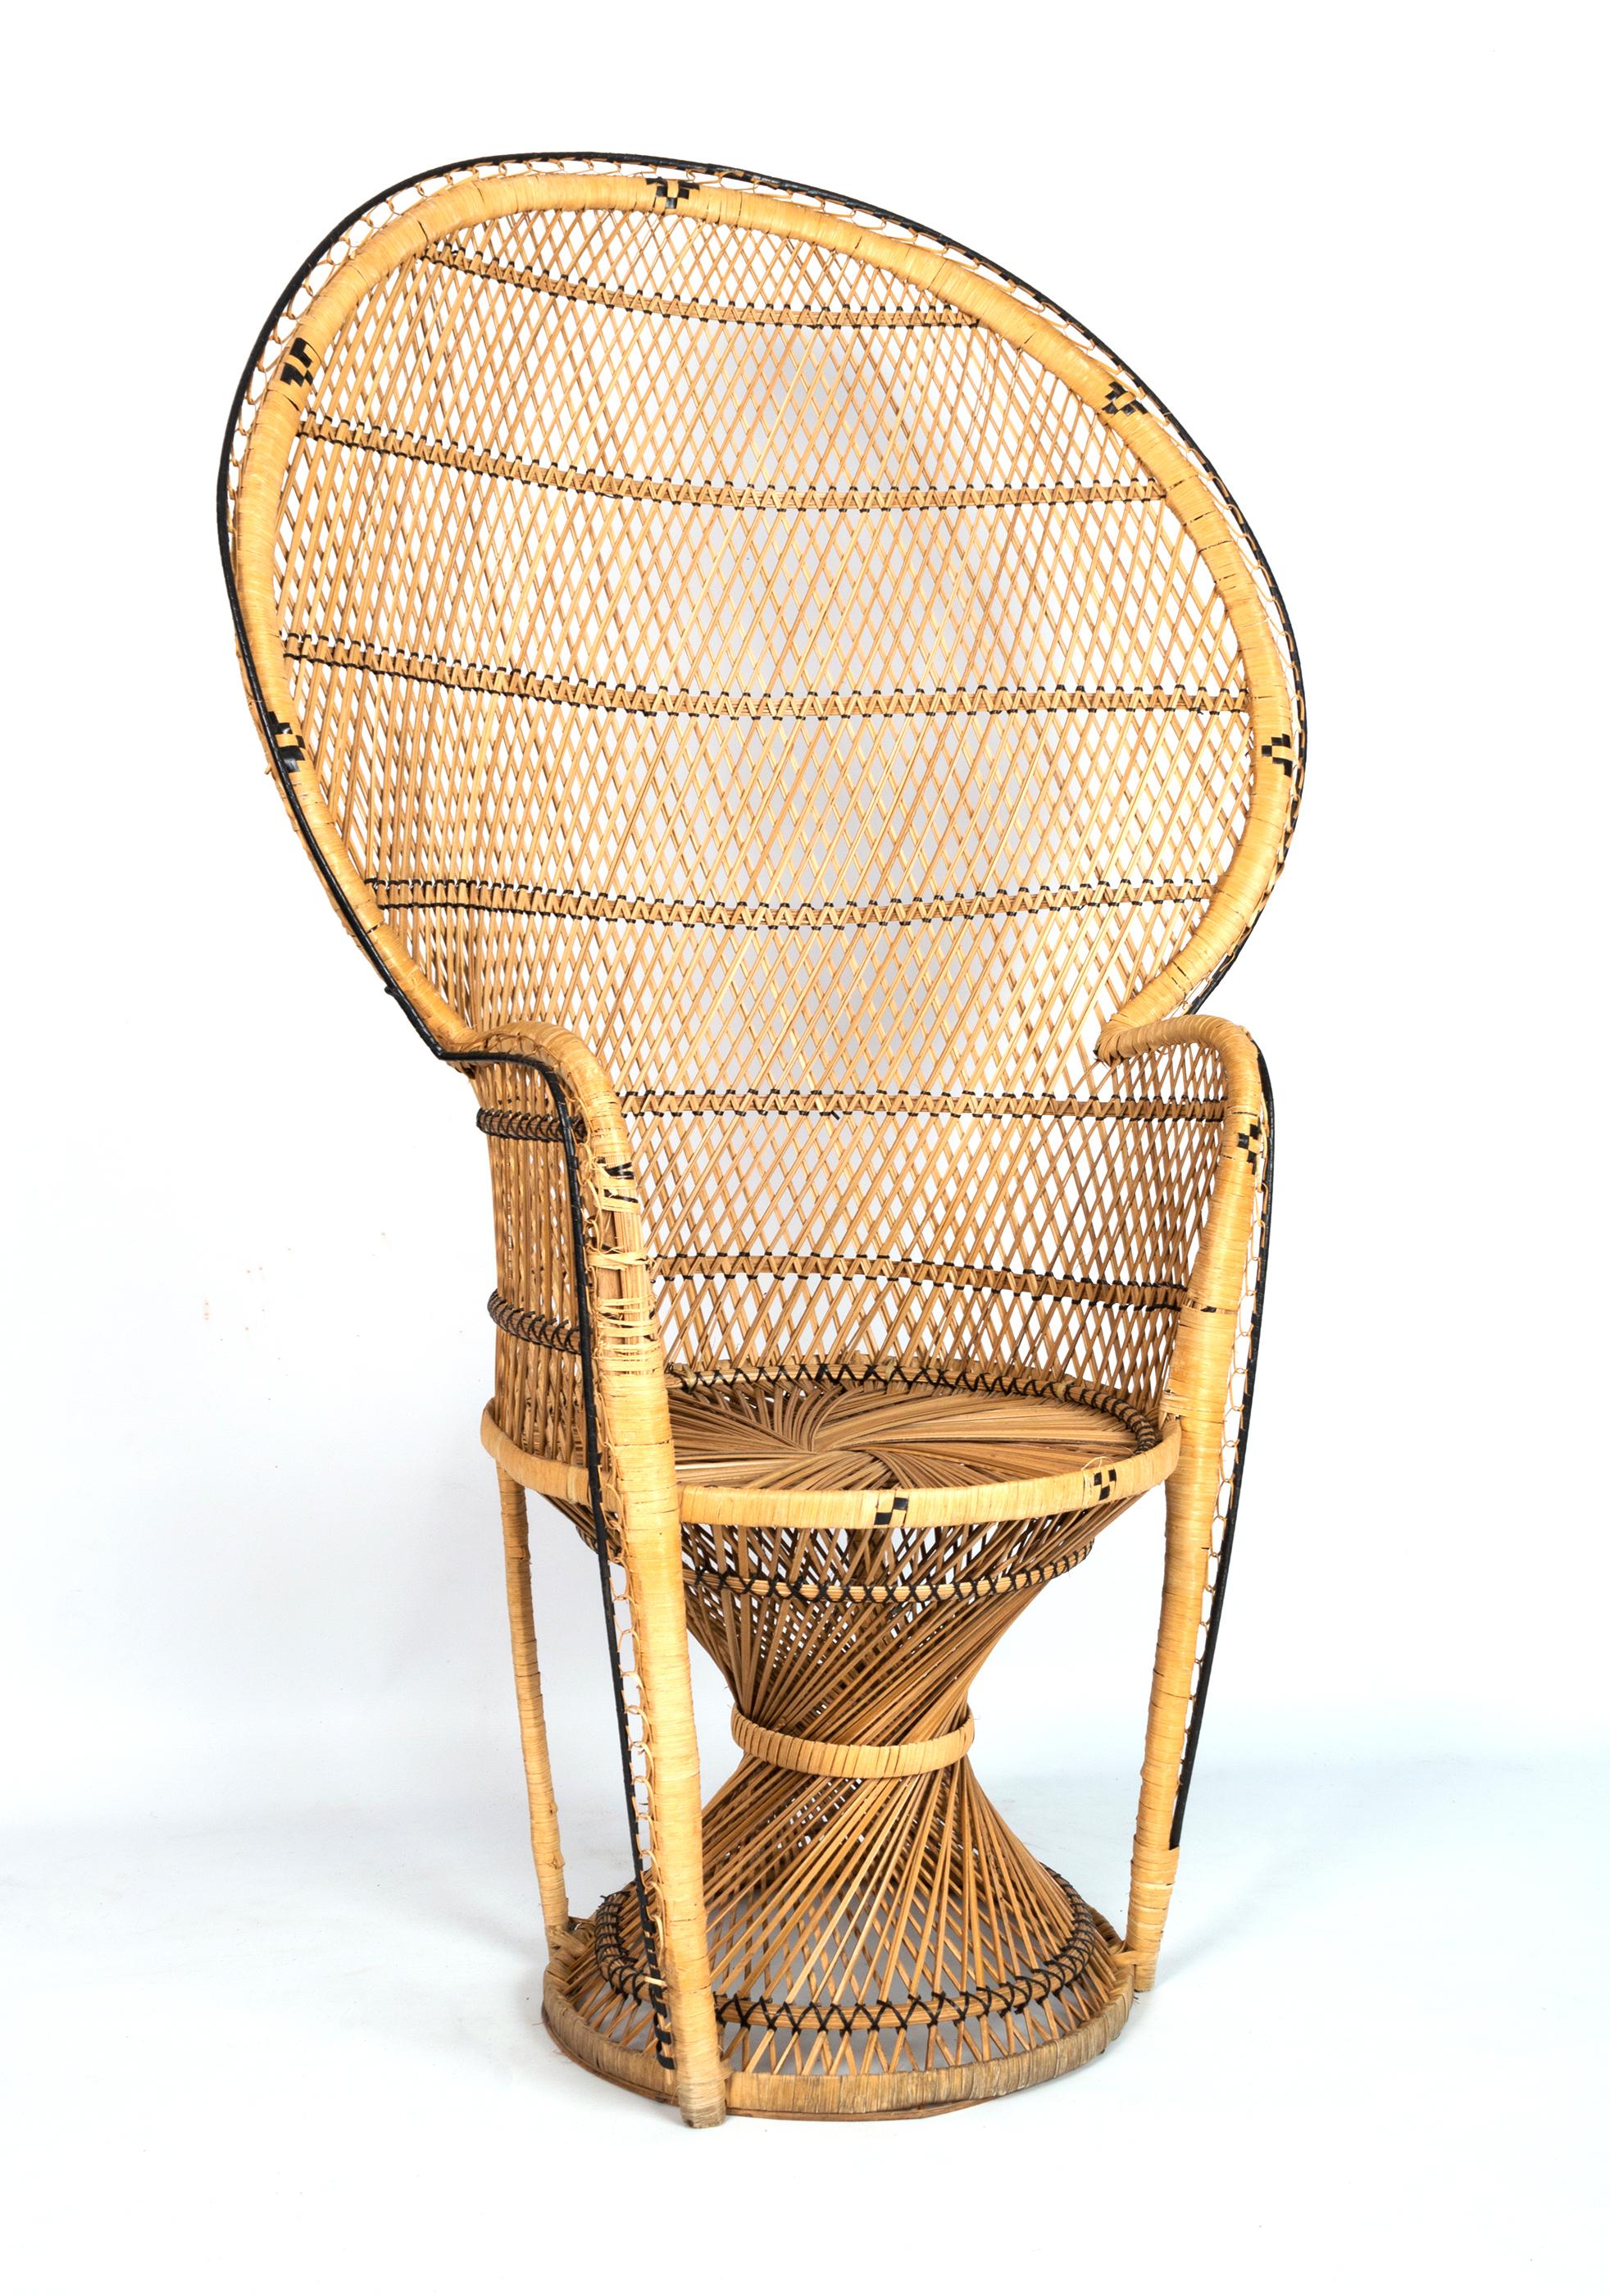 Mid century Emmanuel peacock wicker Rattan chair. C.1960 Italy

In very good condition commensurate with age. general expected signs of wear.